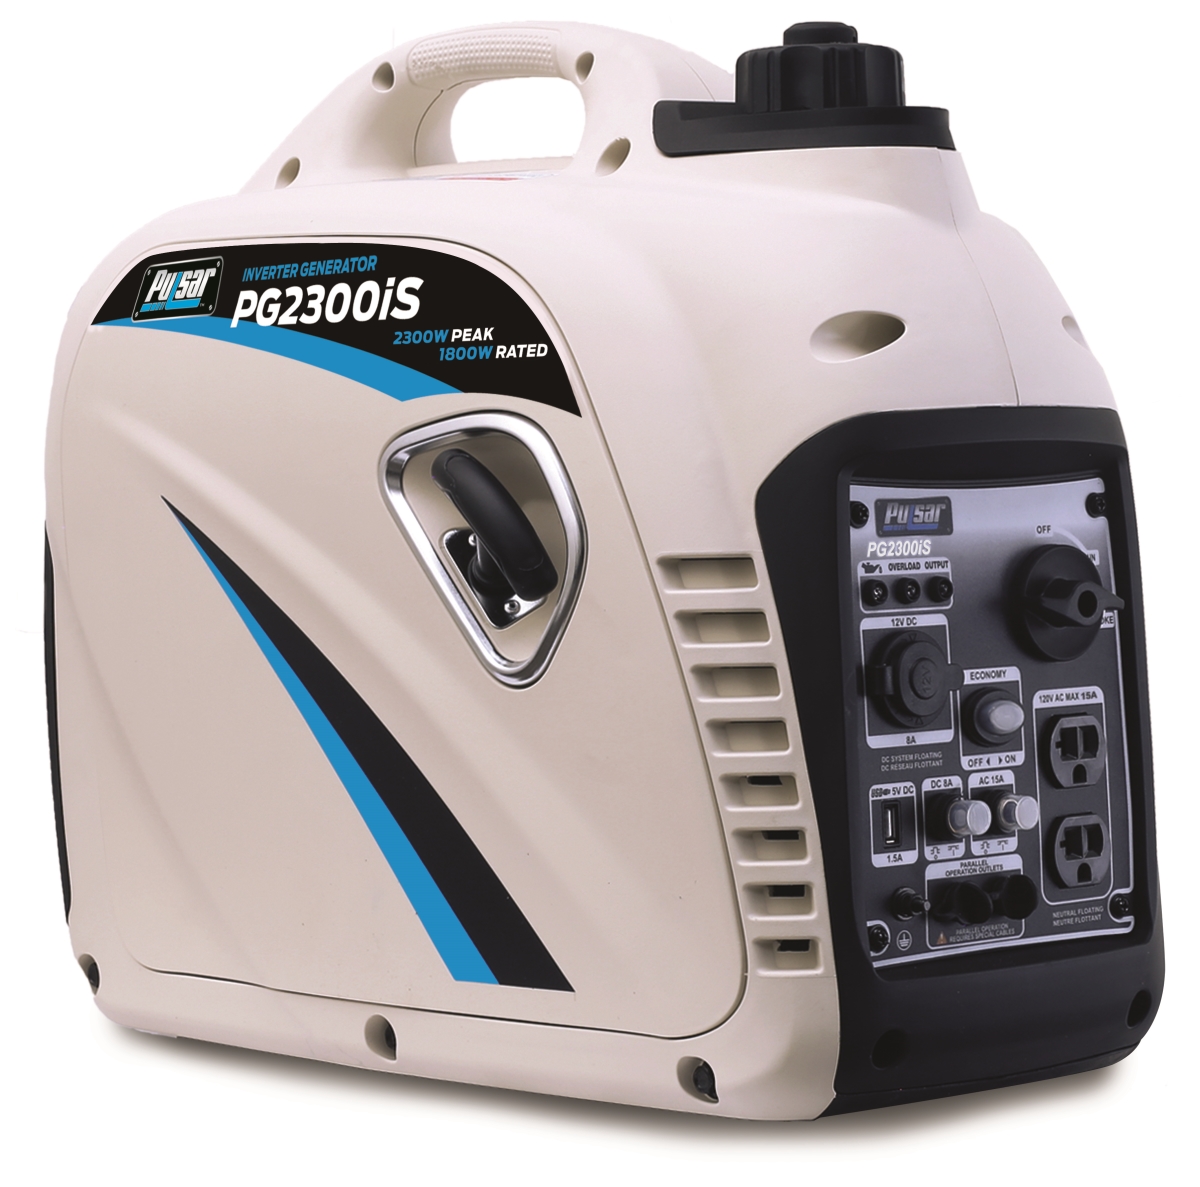 Pulsar PG2300iS 2300W Portable Gas-Powered Inverter Generator with USB Outlet & Parallel Capability